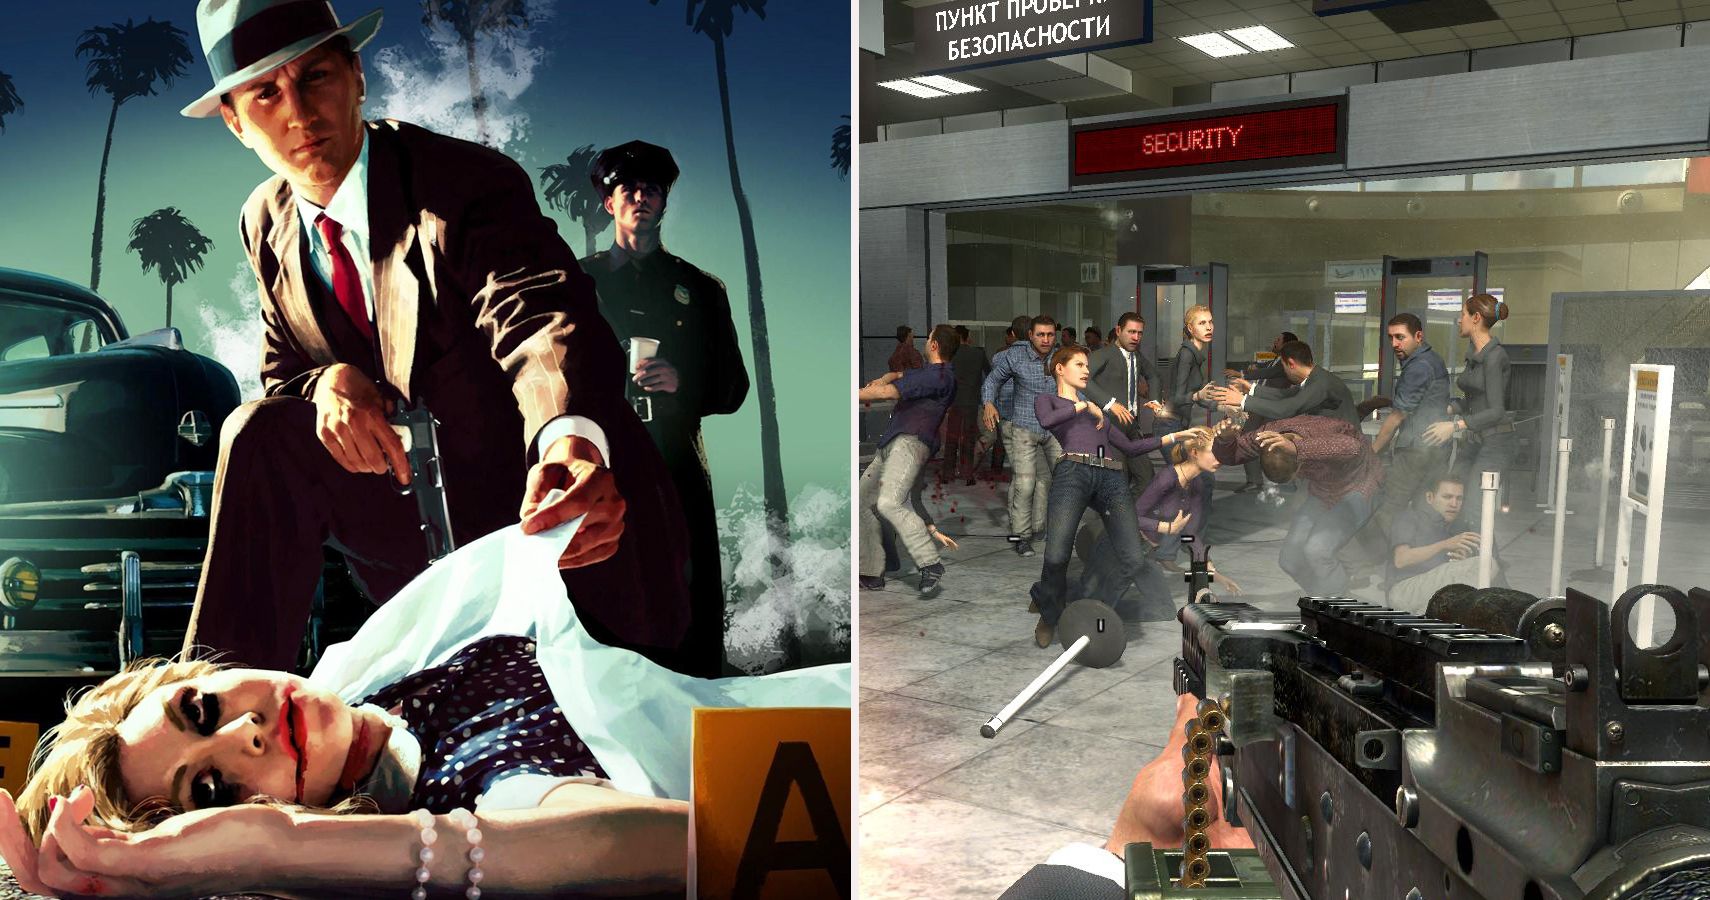 Too Real 21 Video Games Based On Real Life Events